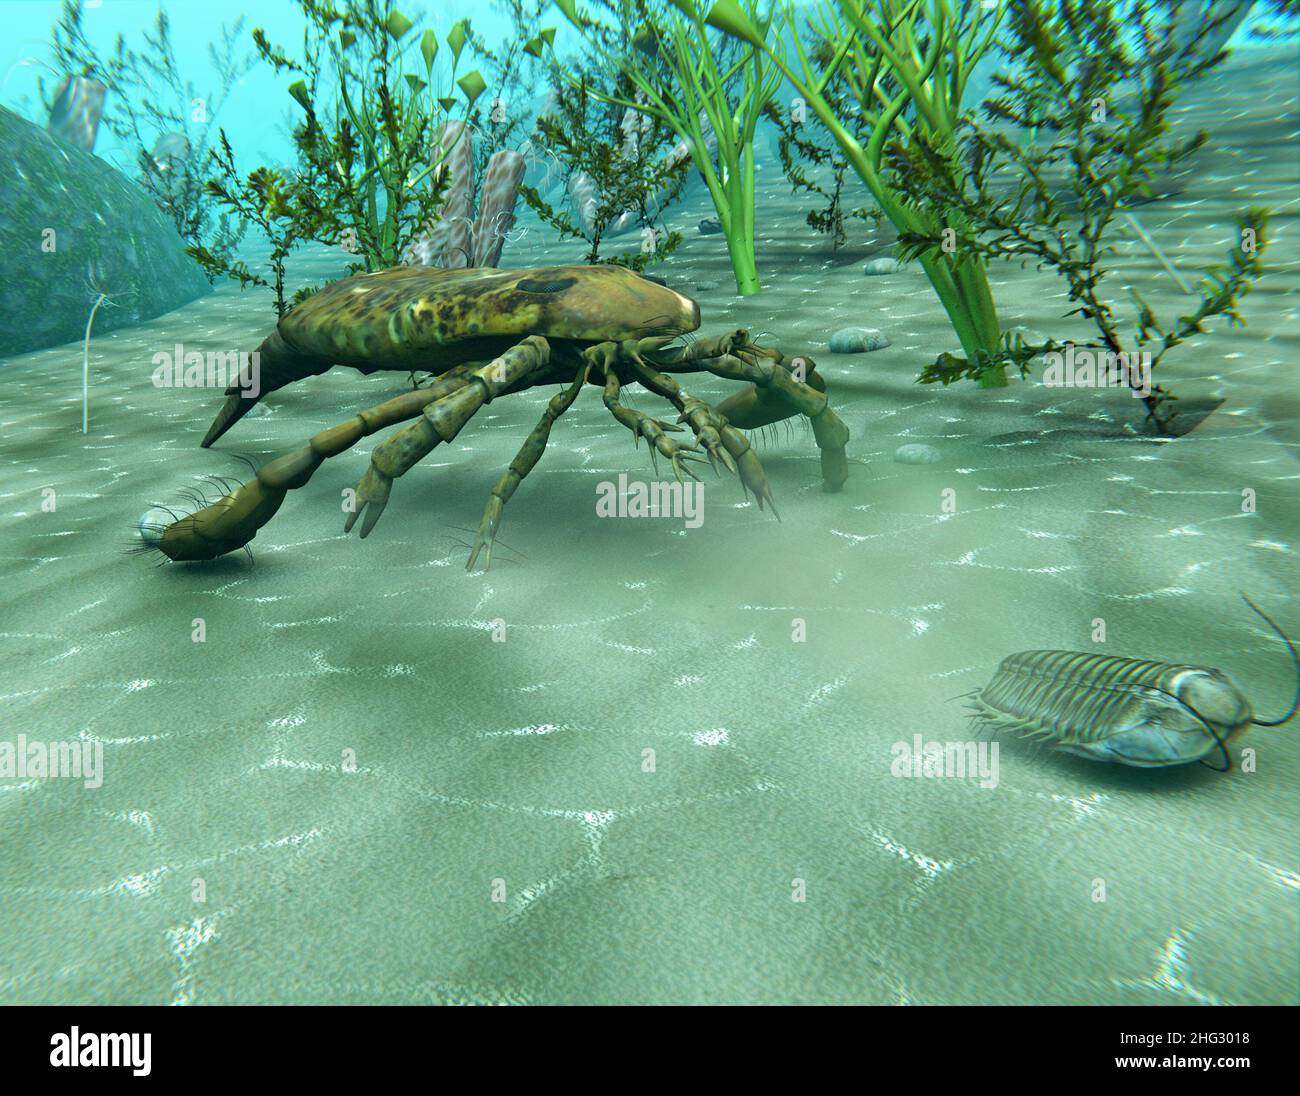 An illustration of Eurypterus (Sea Scorpion) chasing a Trilobite in an underwater scene from the Ordovician Period (300 million years ago) Stock Photo